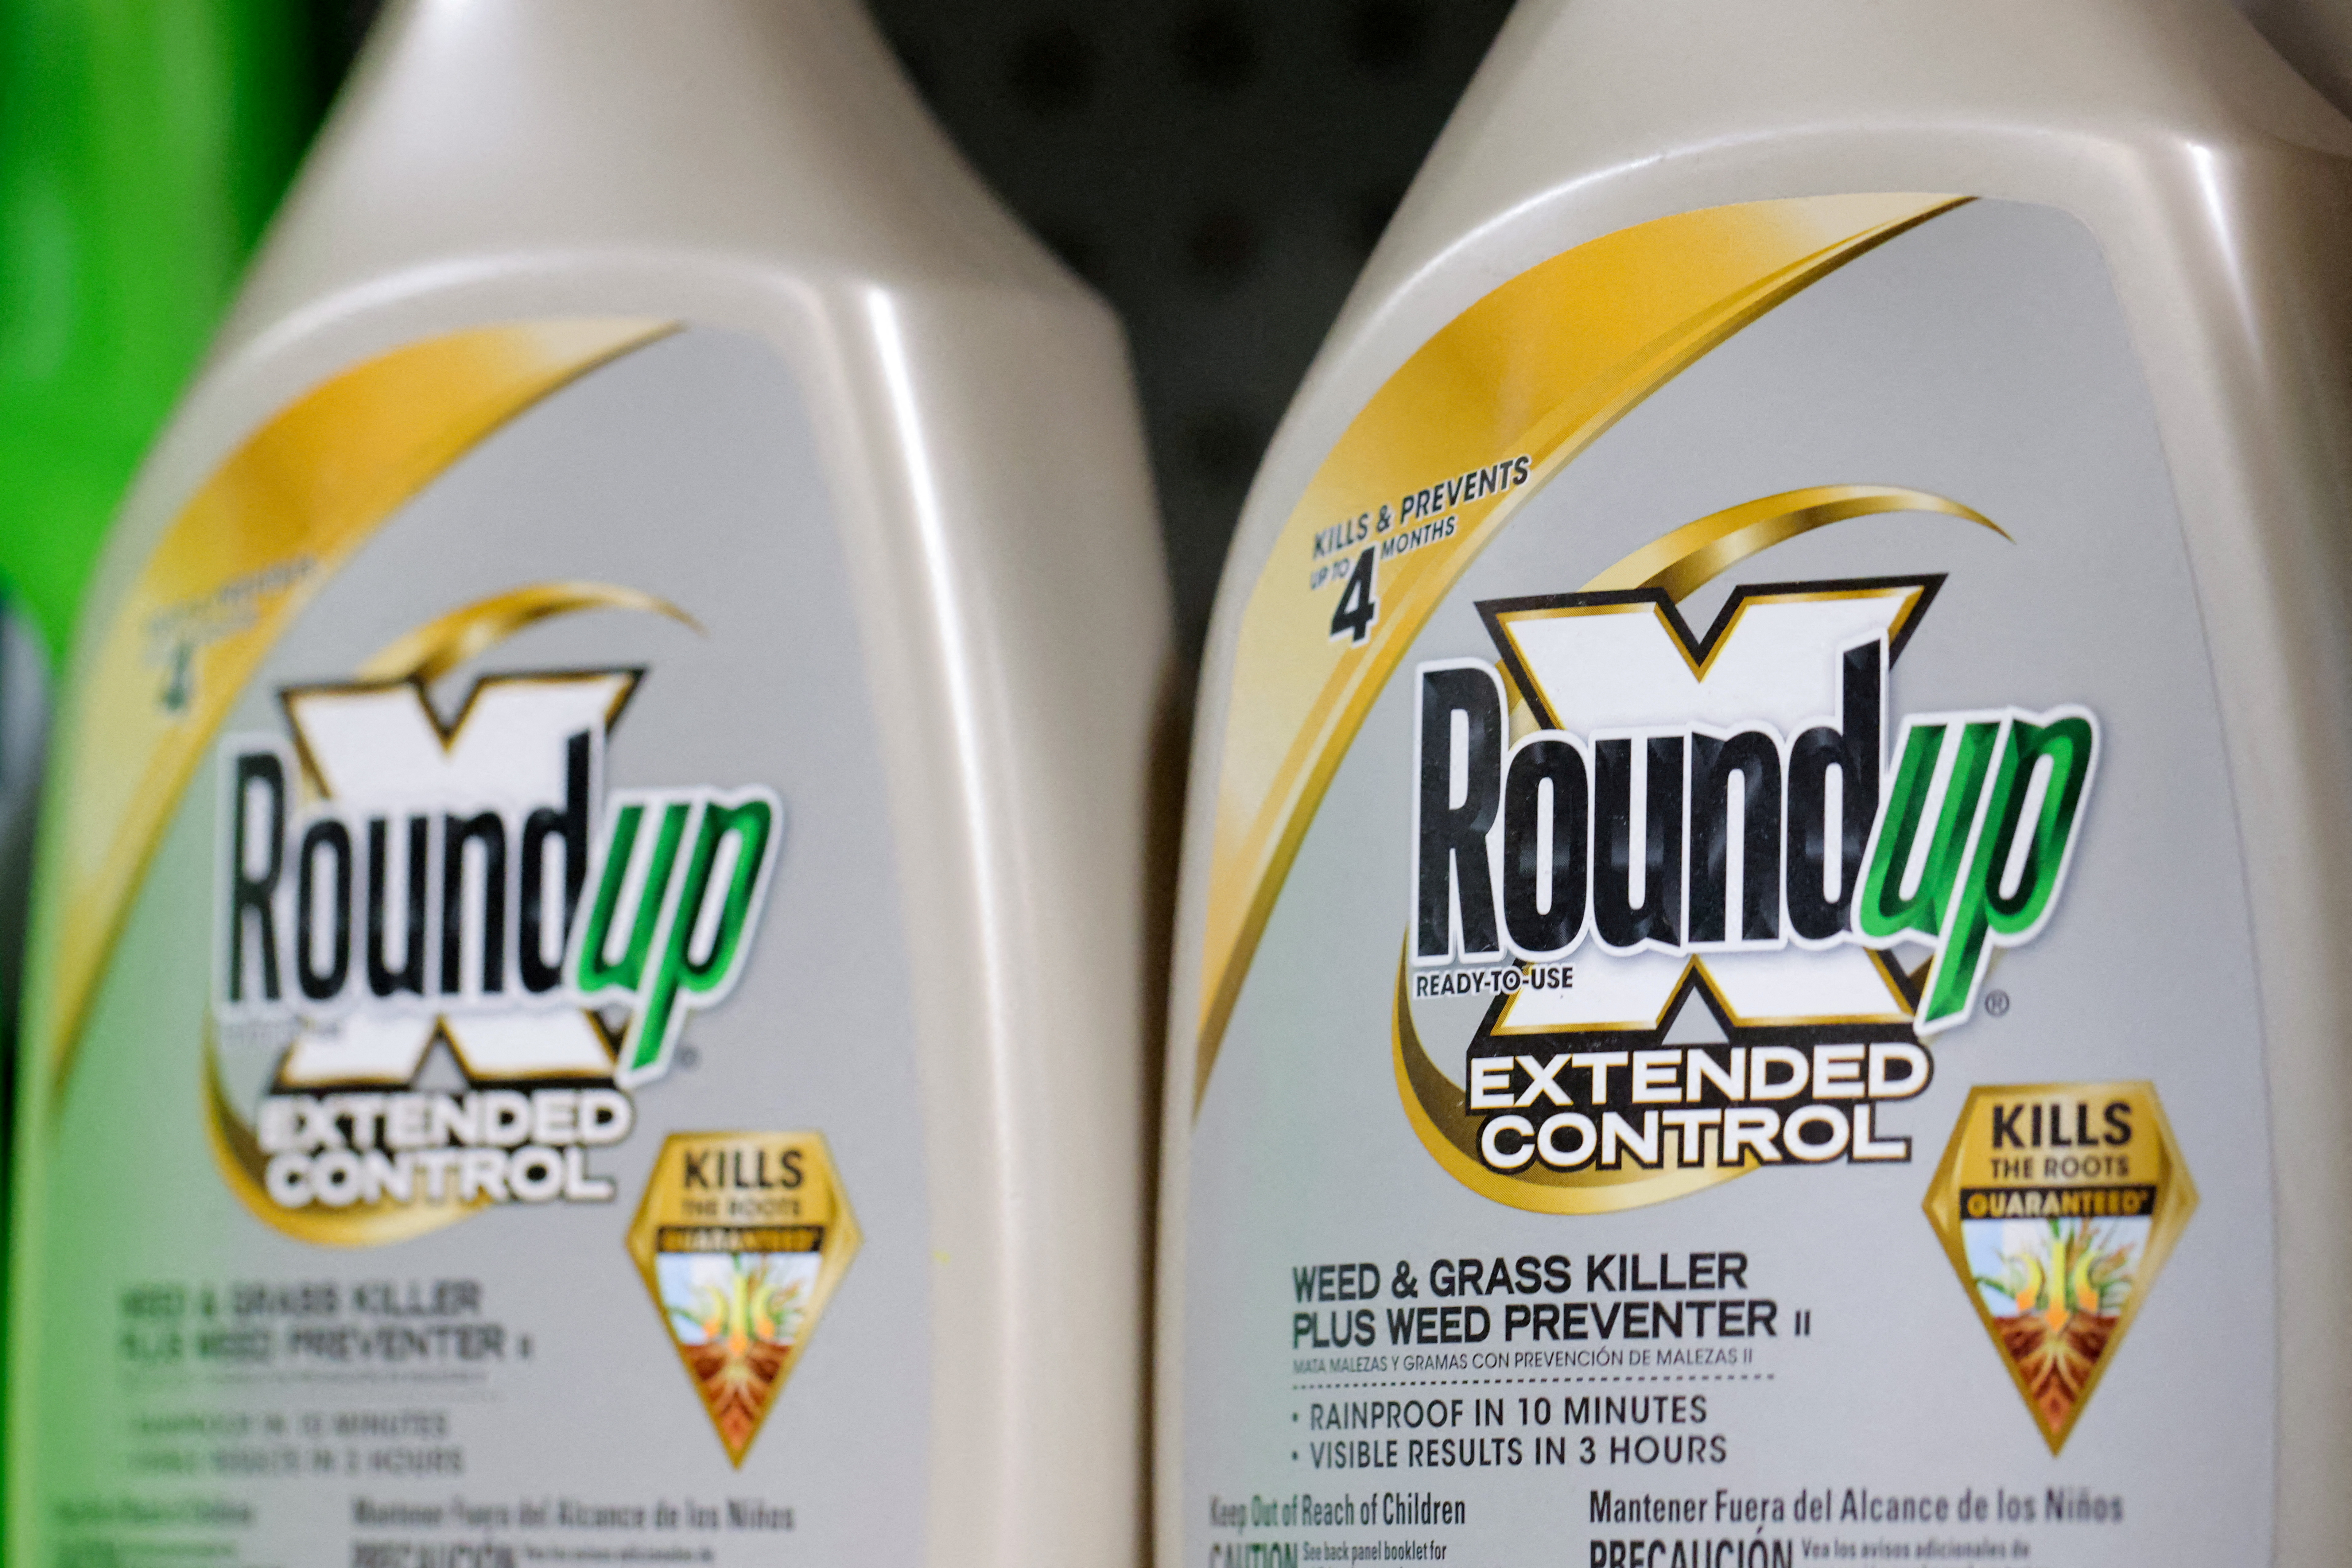 Bottles of Roundup, a brand owned by Bayer, are seen for sale in a store in Manhattan, New York City